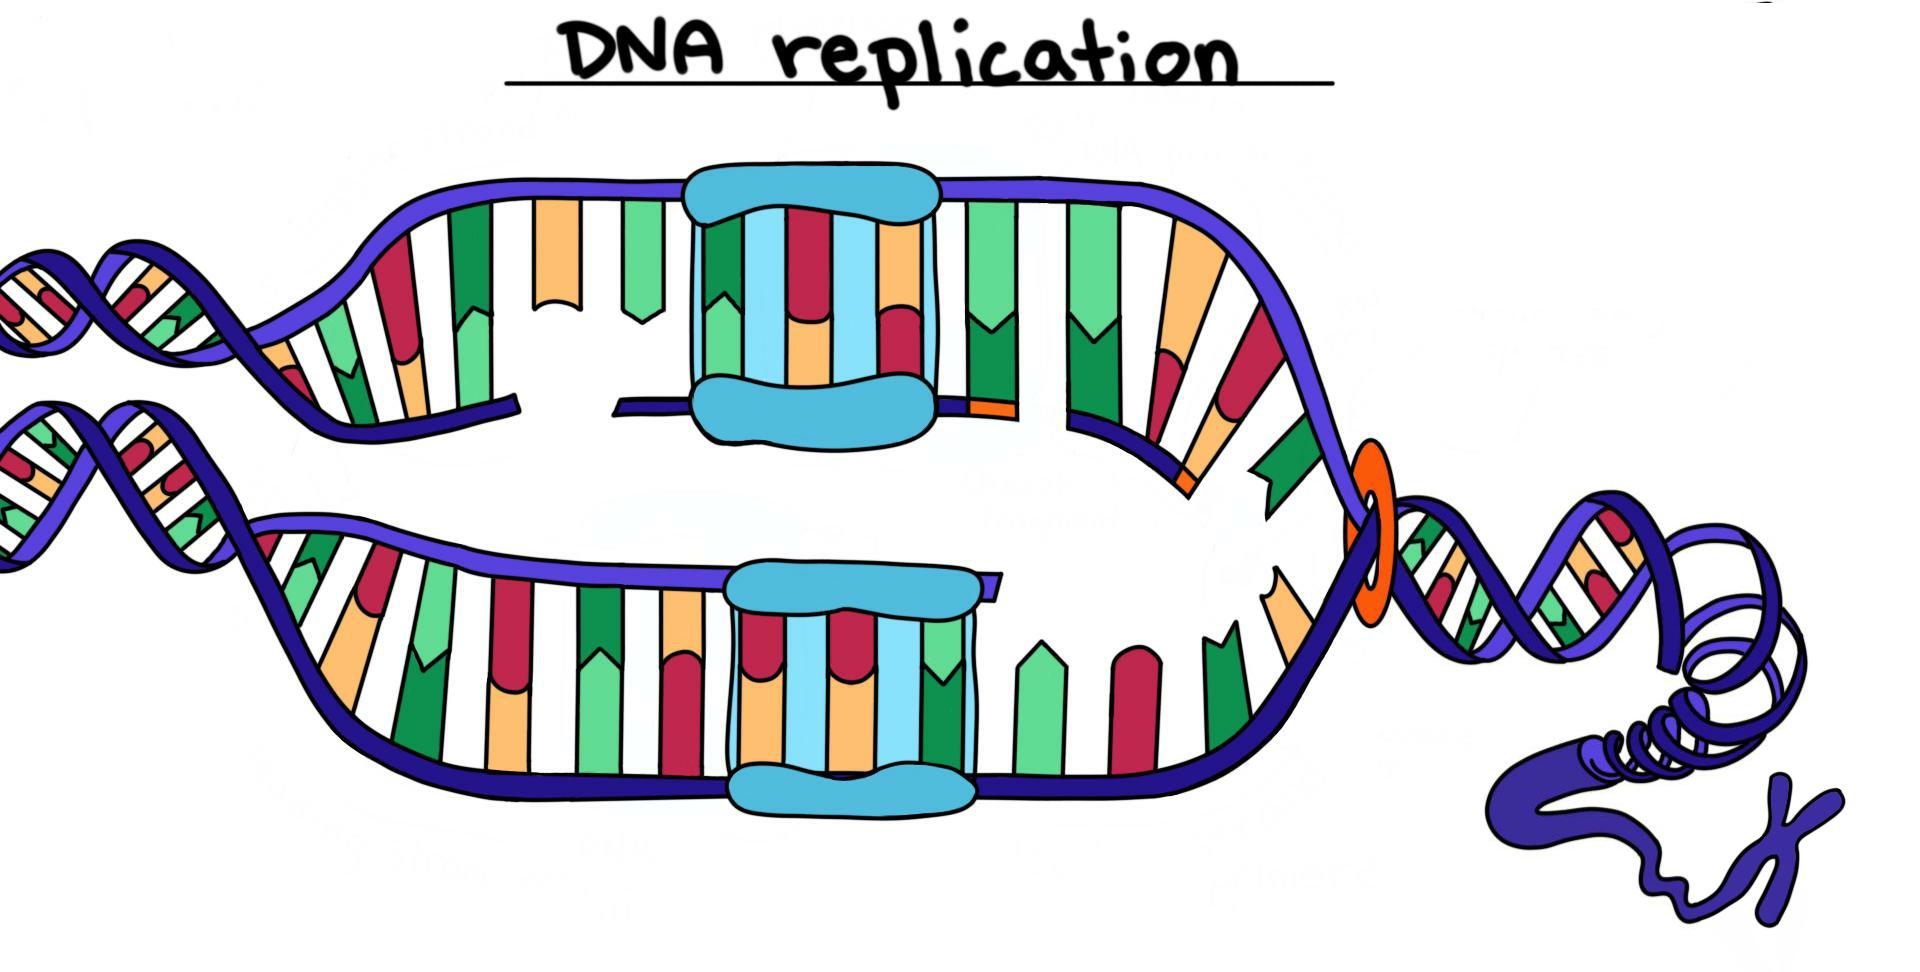 16-surprising-facts-about-dna-replication